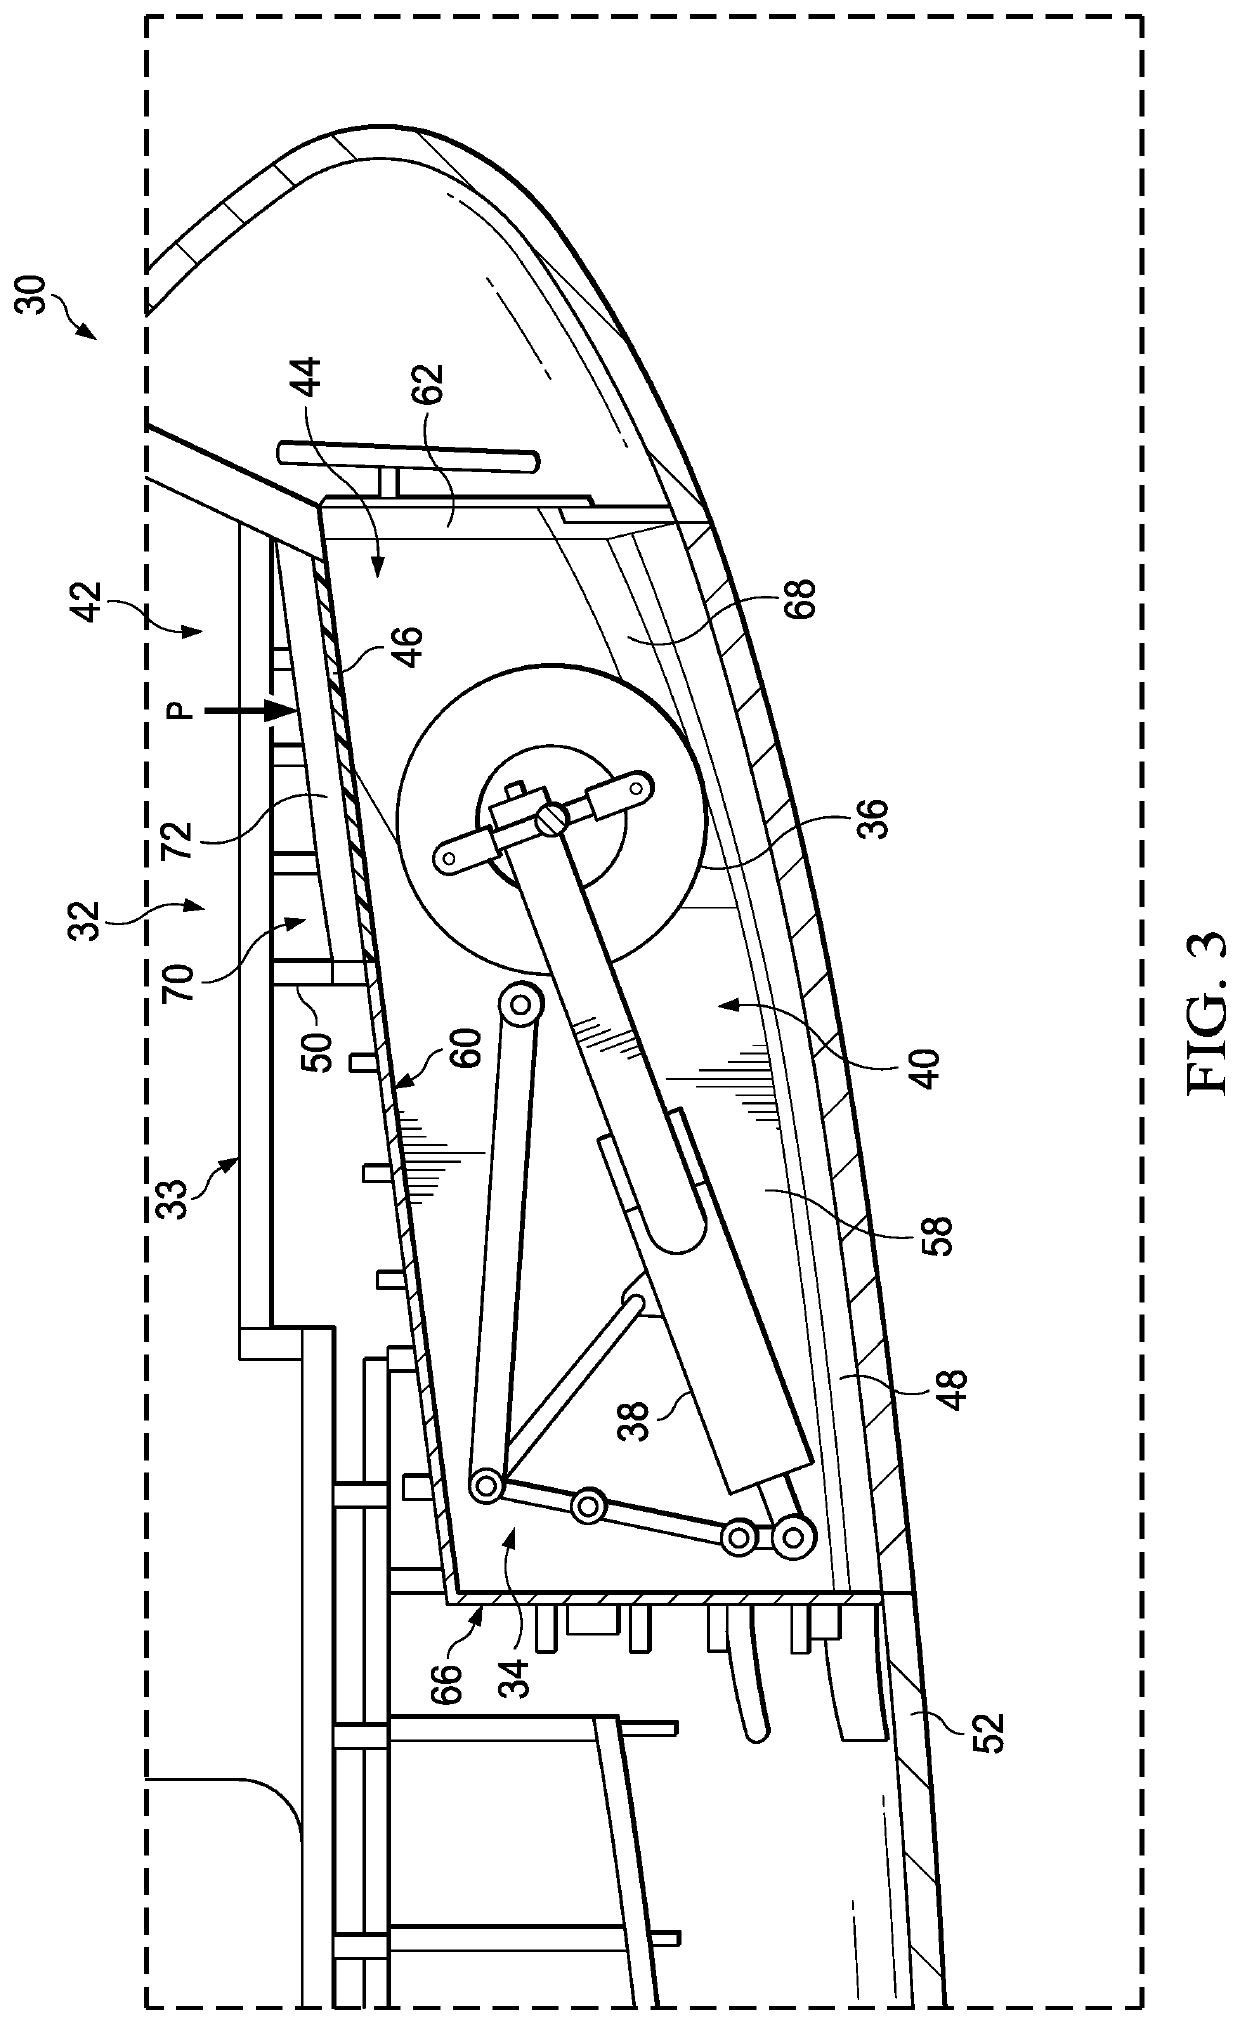 Flat composite panel with tear arrestment and method of making the same